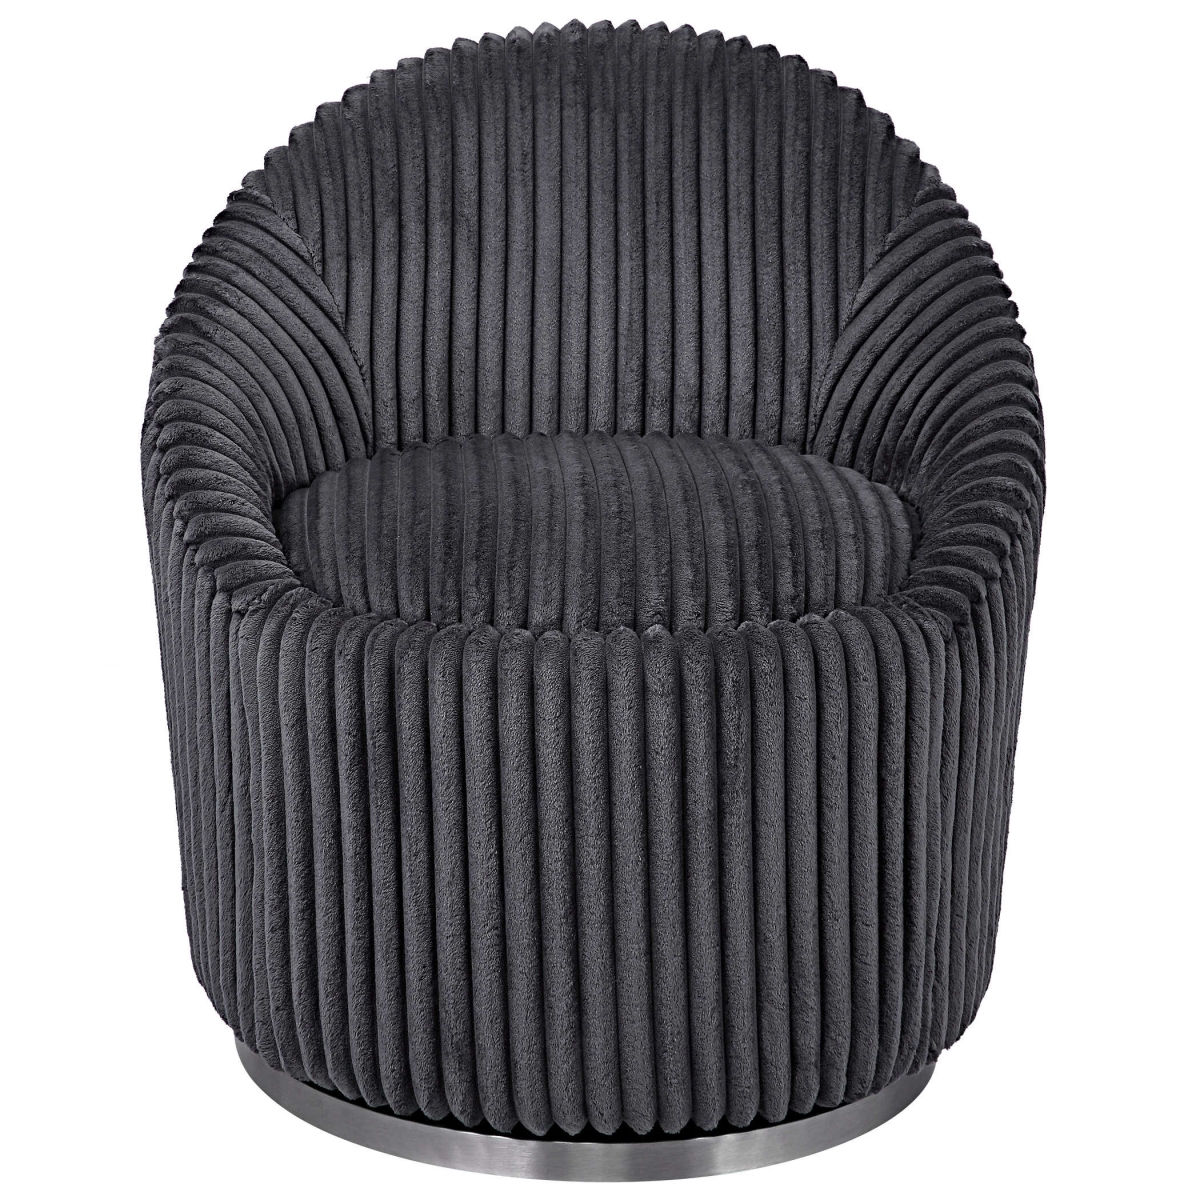 Picture of 212 Main 23599 Crue Gray Fabric Swivel Chair  Brushed Nickel